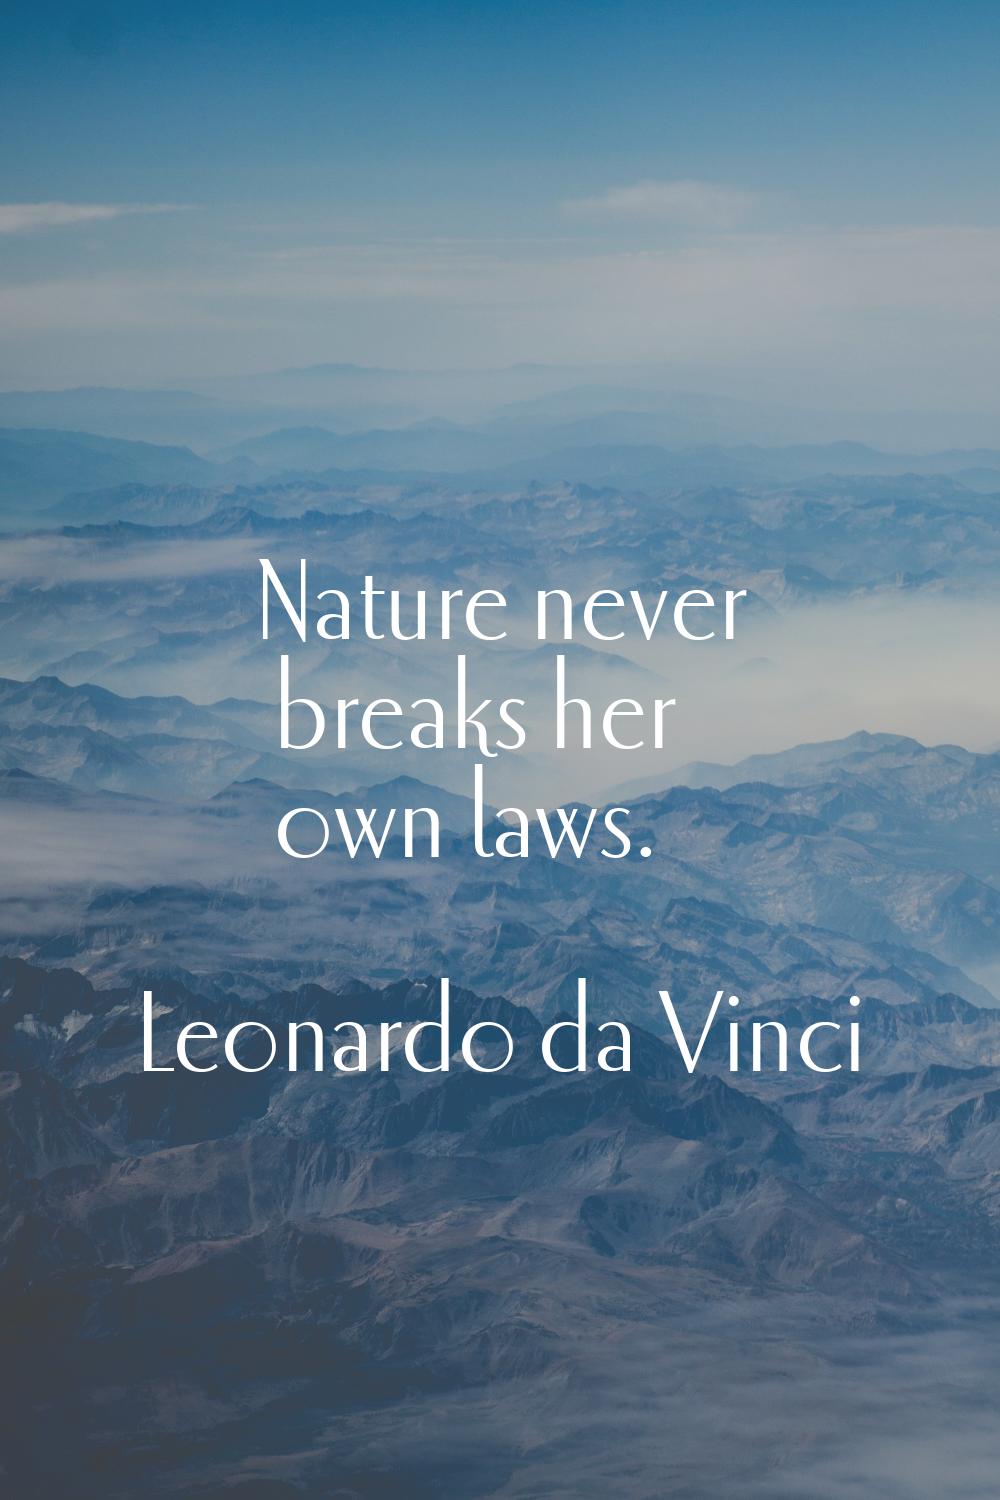 Nature never breaks her own laws.